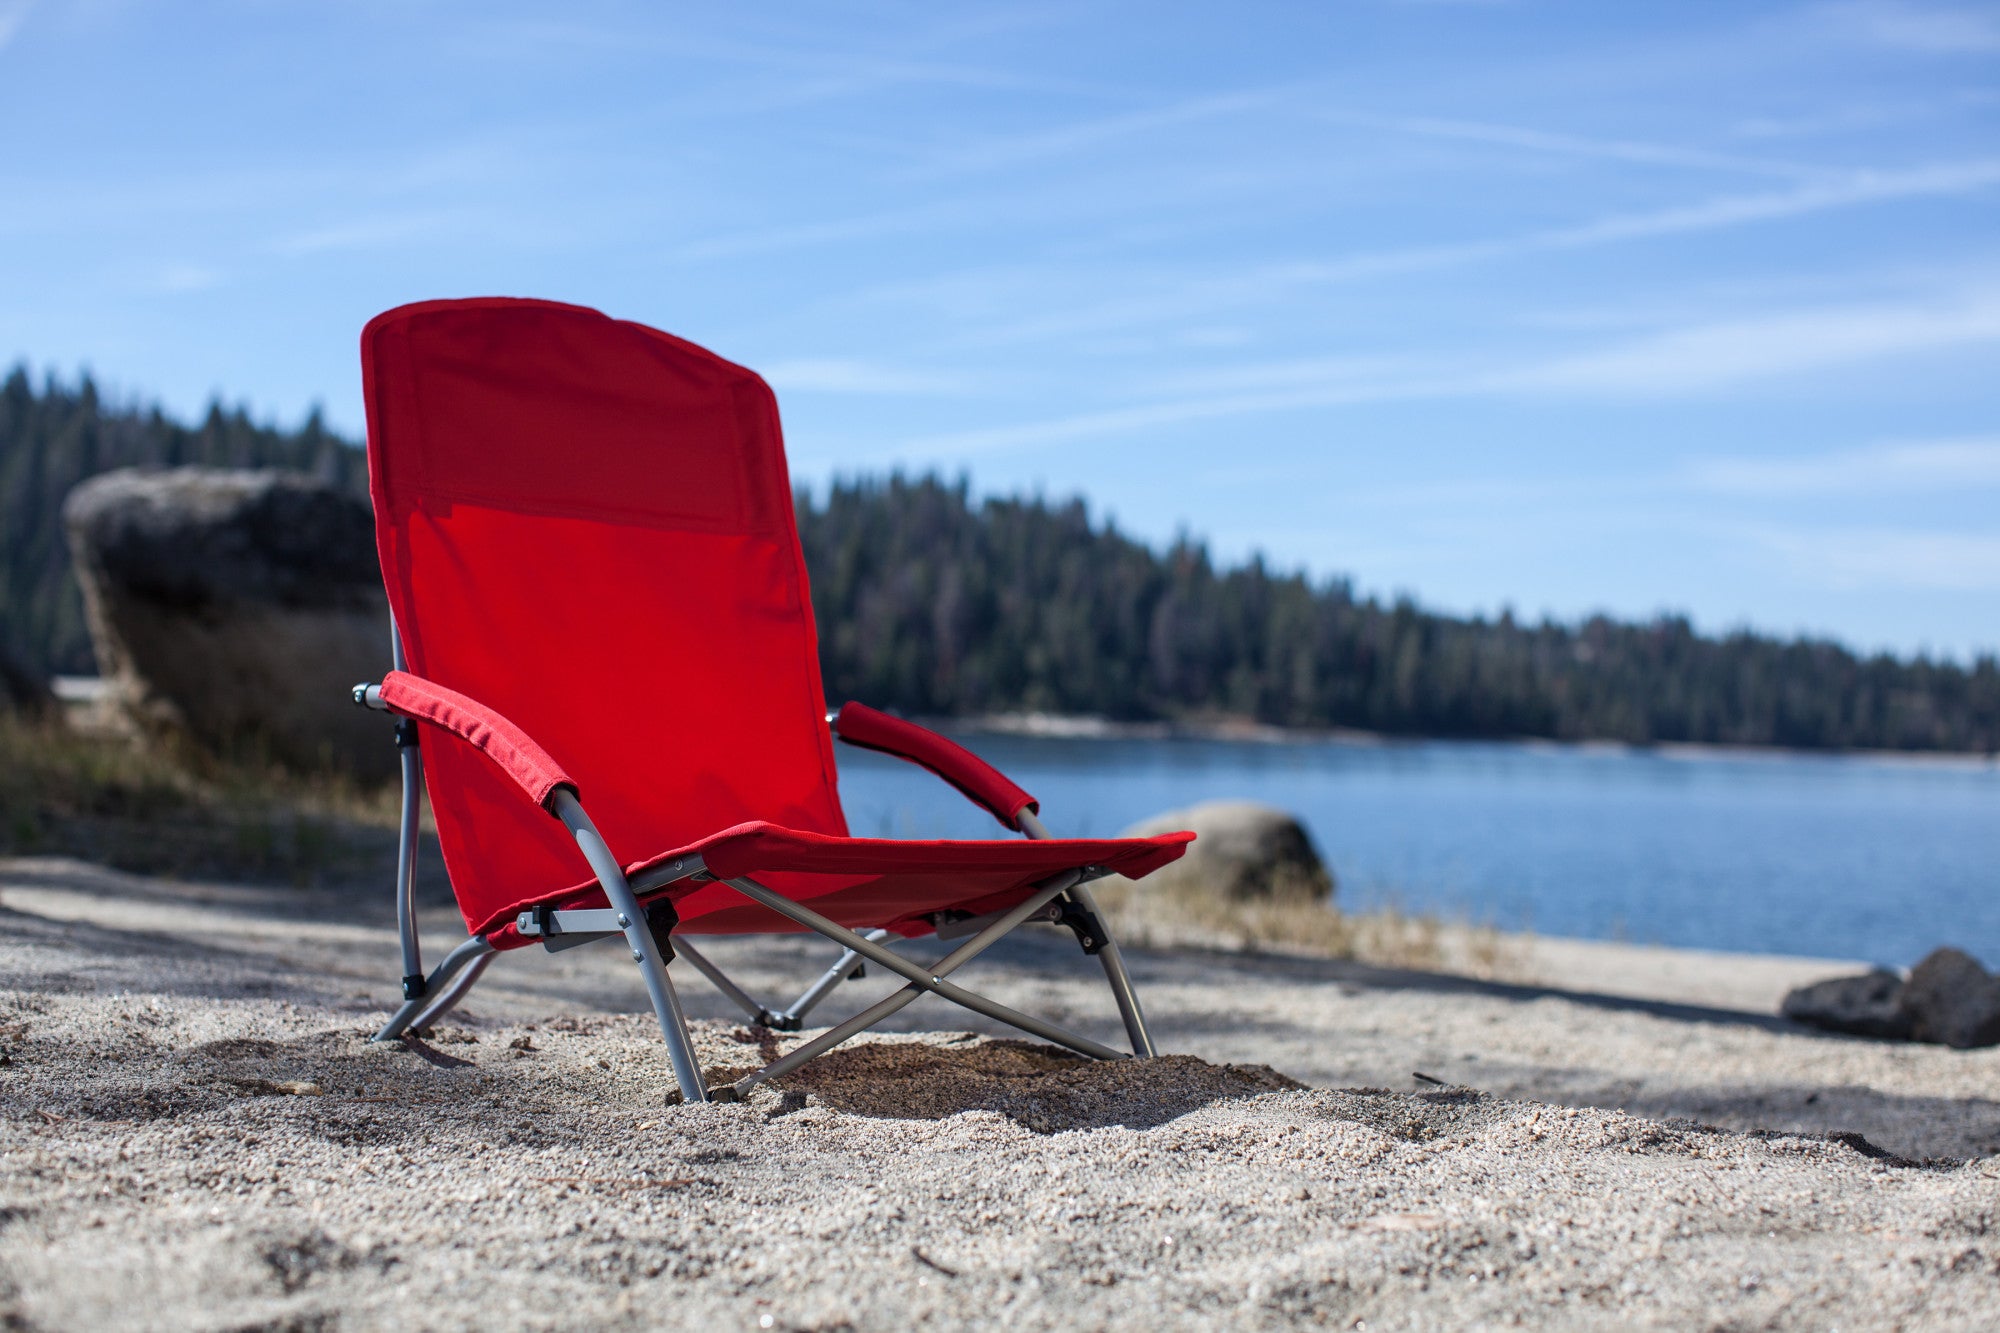 Stanford Cardinal - Tranquility Beach Chair with Carry Bag